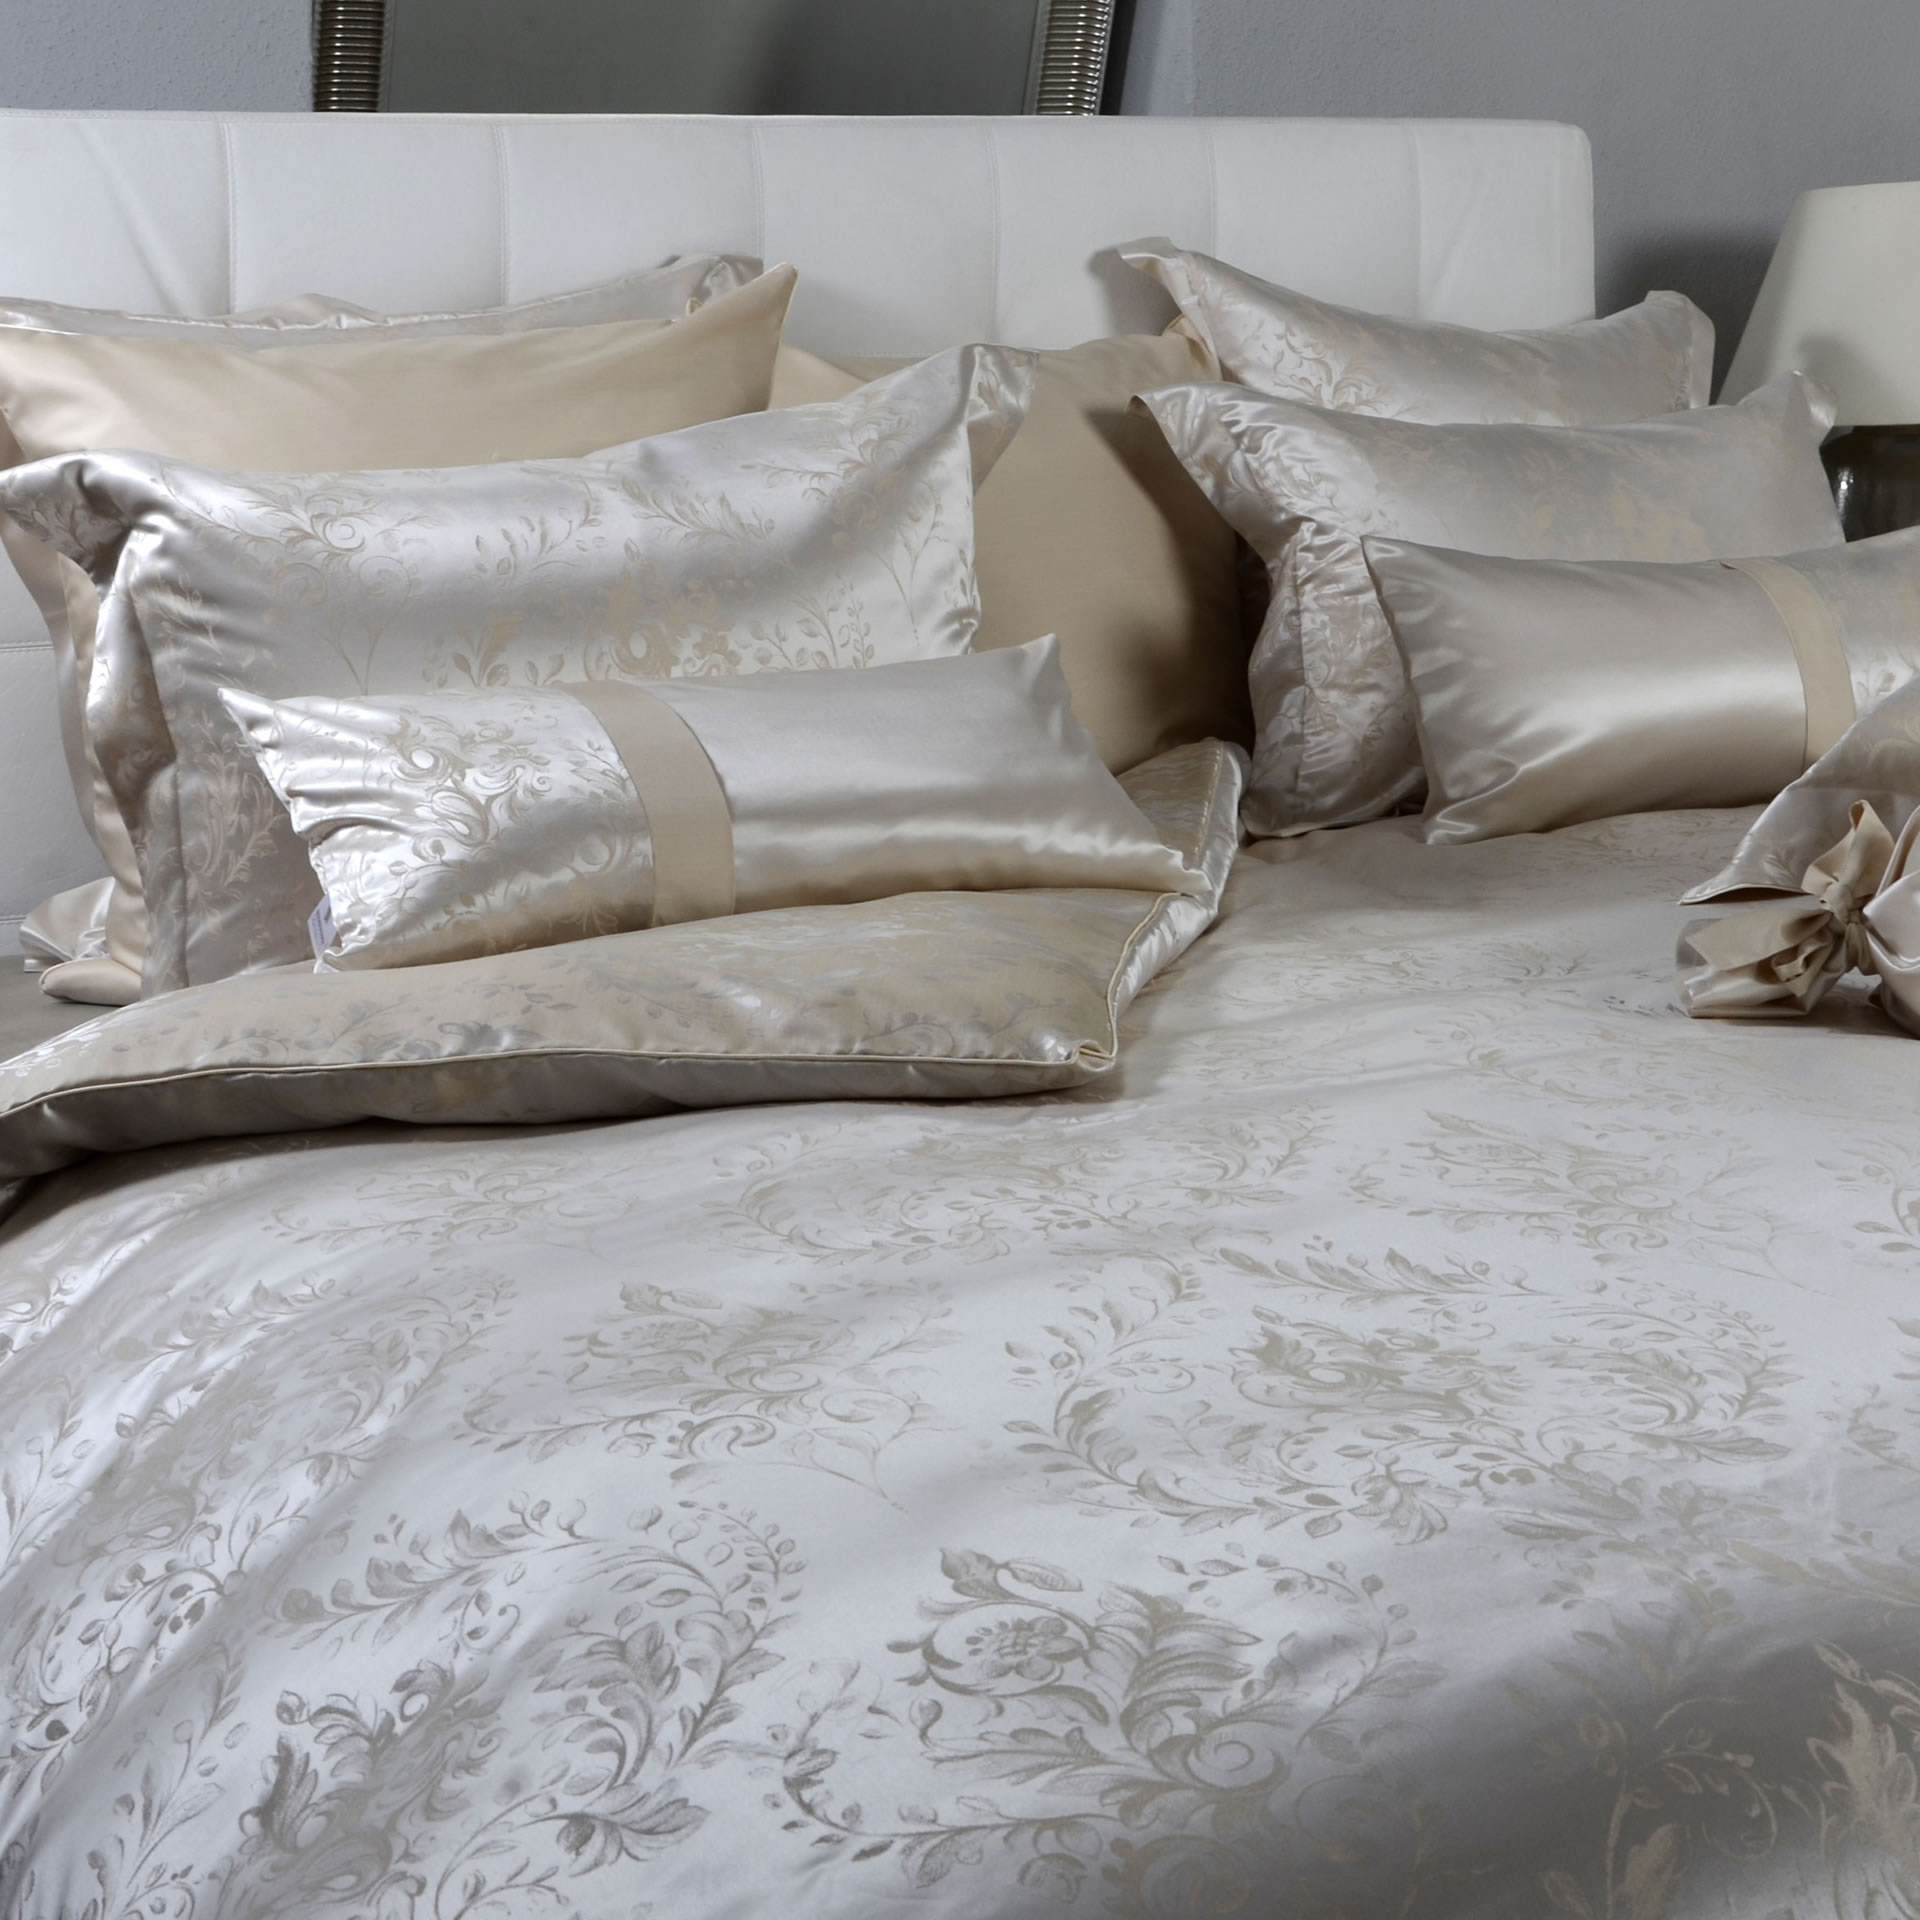 Silk Bed Linen - Heritage - French Romance - Nature